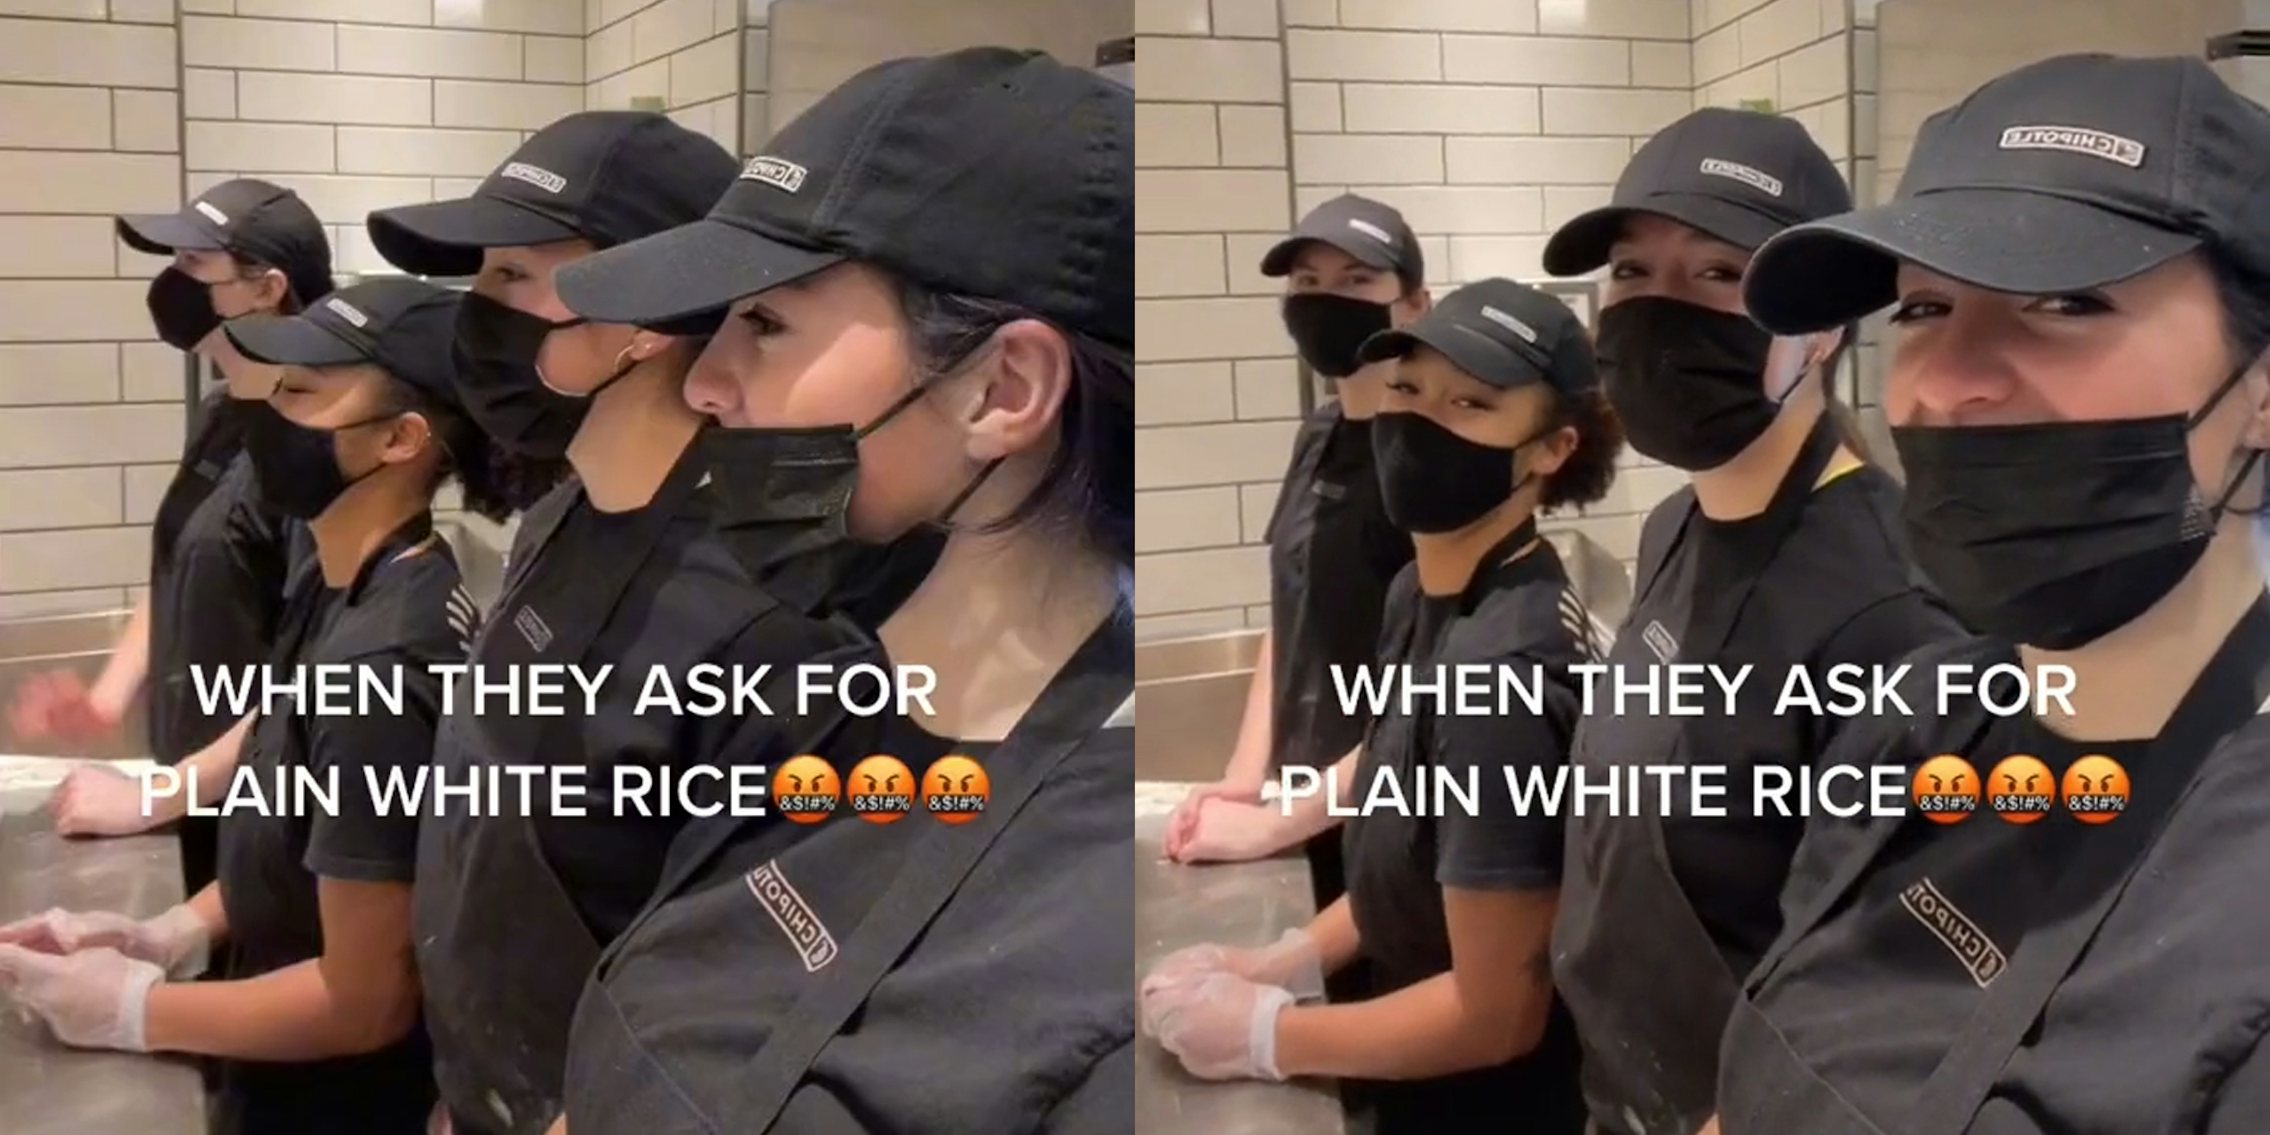 Chipotle workers in a line look to their left and laugh with caption 'When they ask for plain white rice'